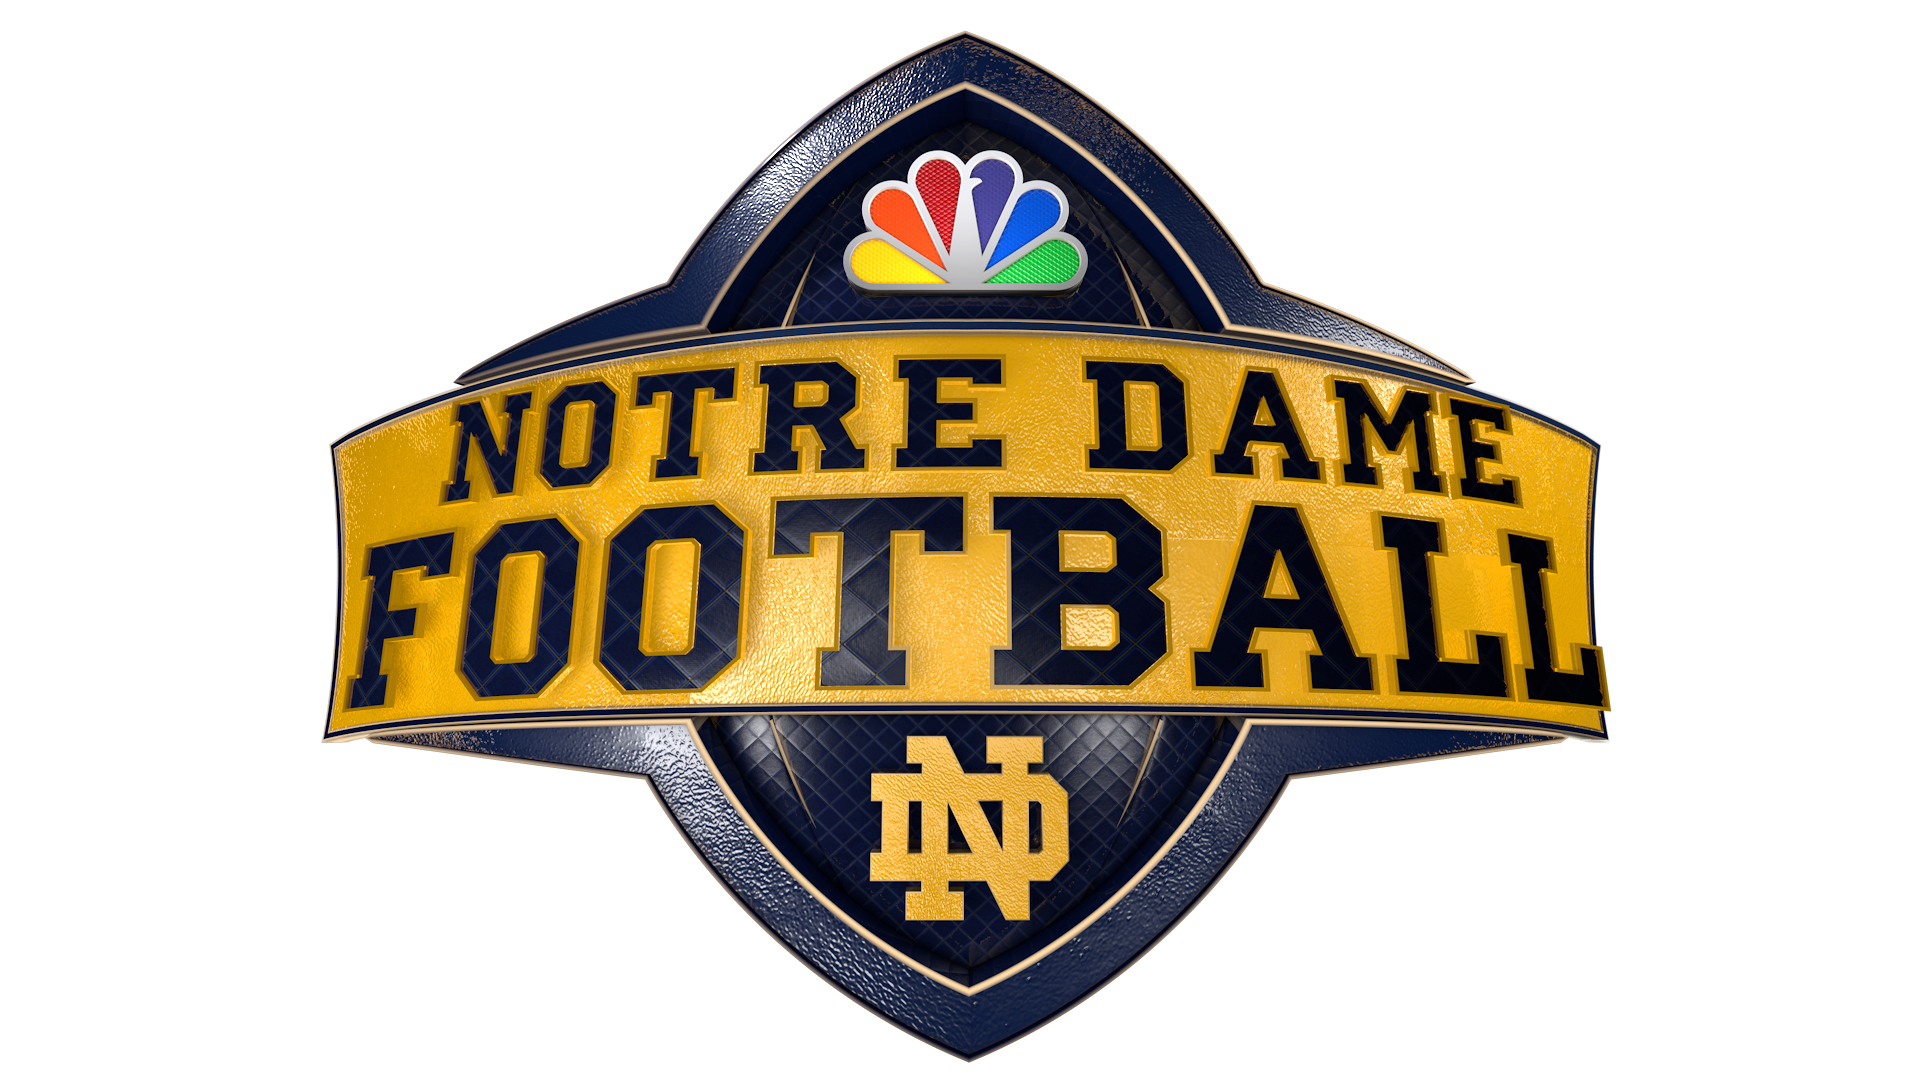 NBC Sports PR on Twitter: "Ratings notes: Through three games, Notre